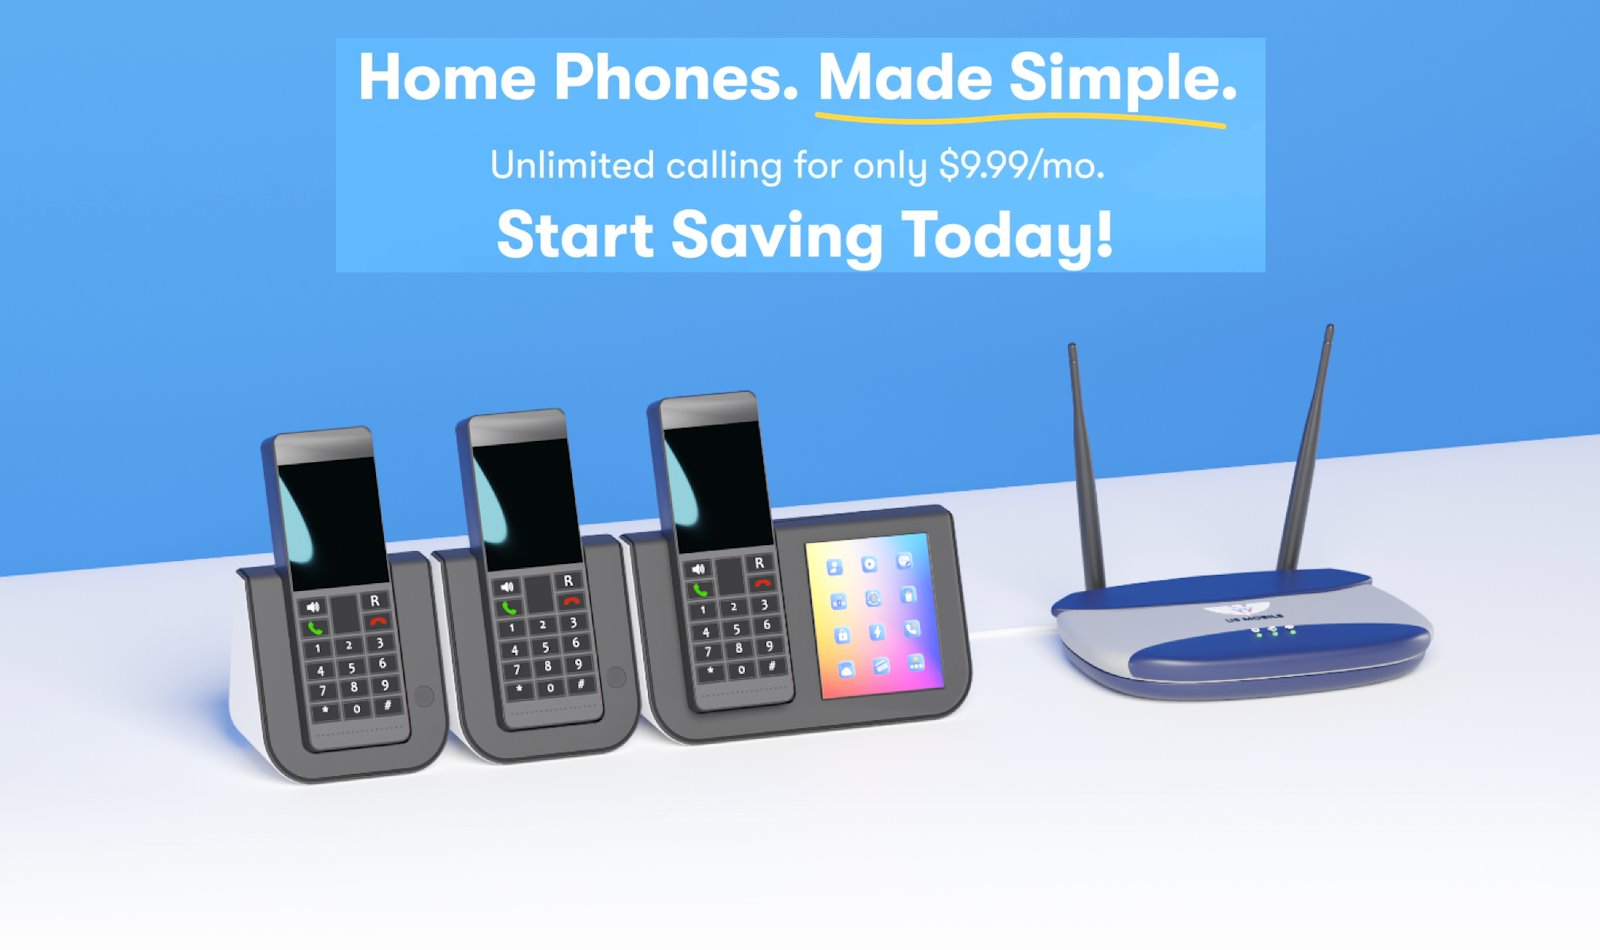 US Mobile Launches Home Phone